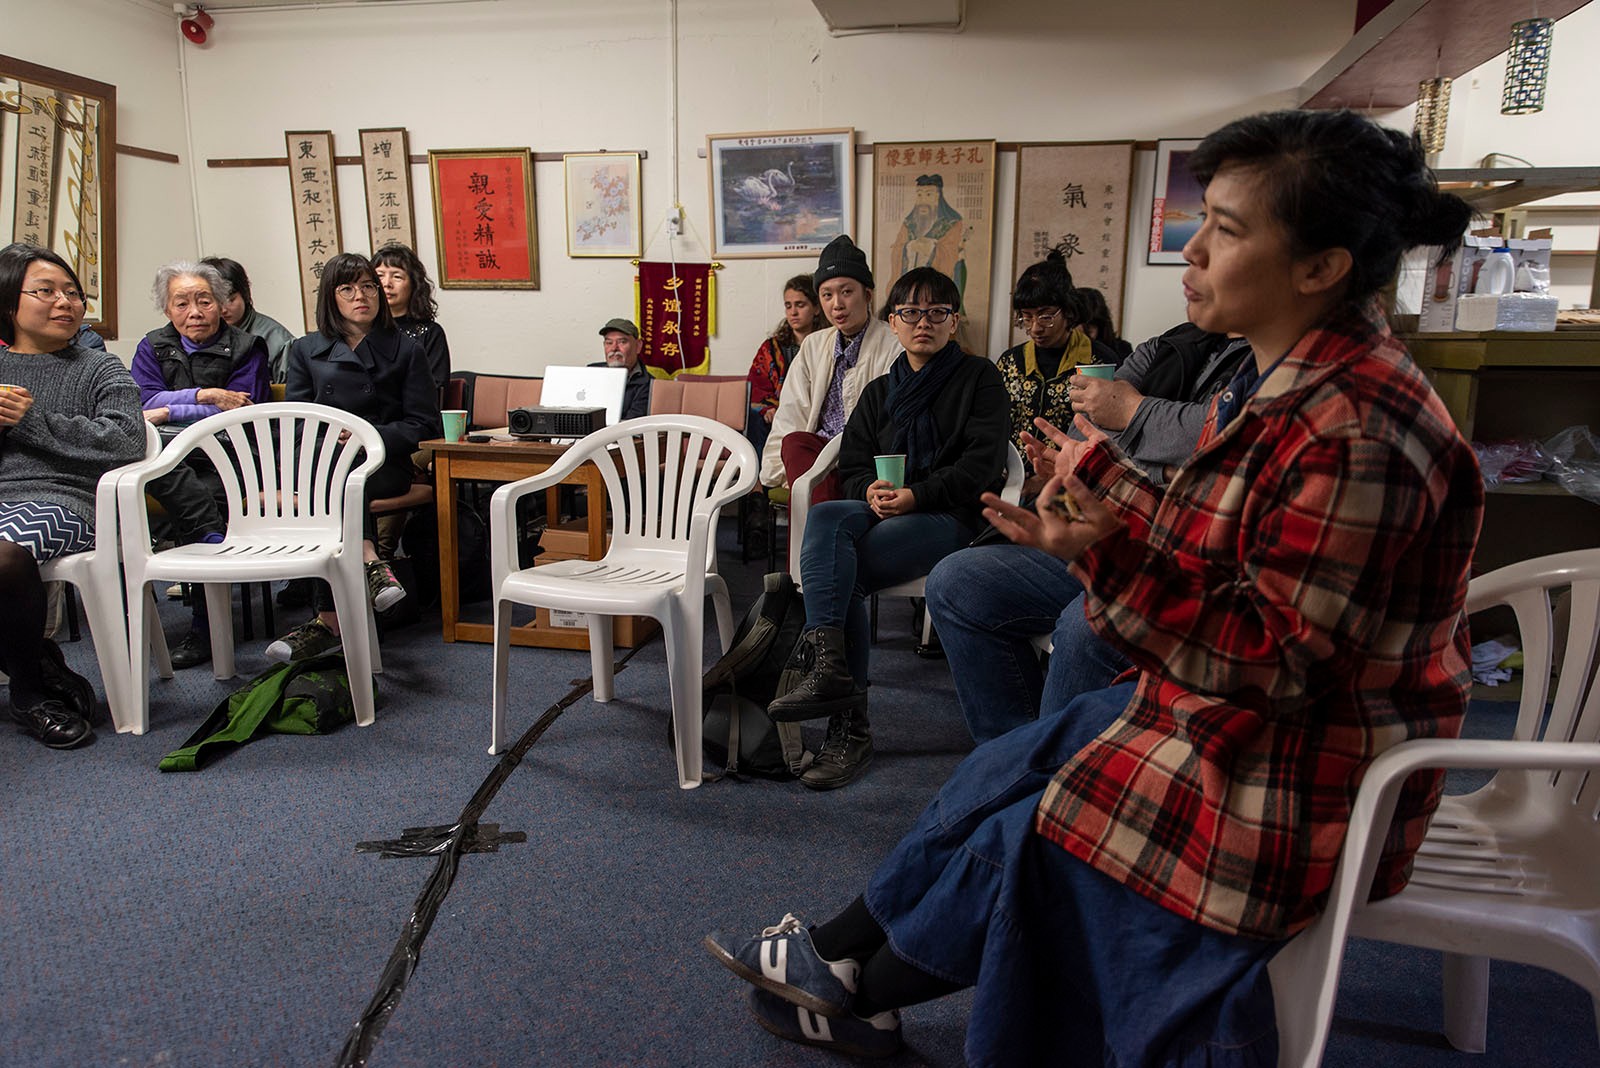 Kerry Ann Lee speaks in the foreground as other Asian people watch on, inside Chinese community rooms.